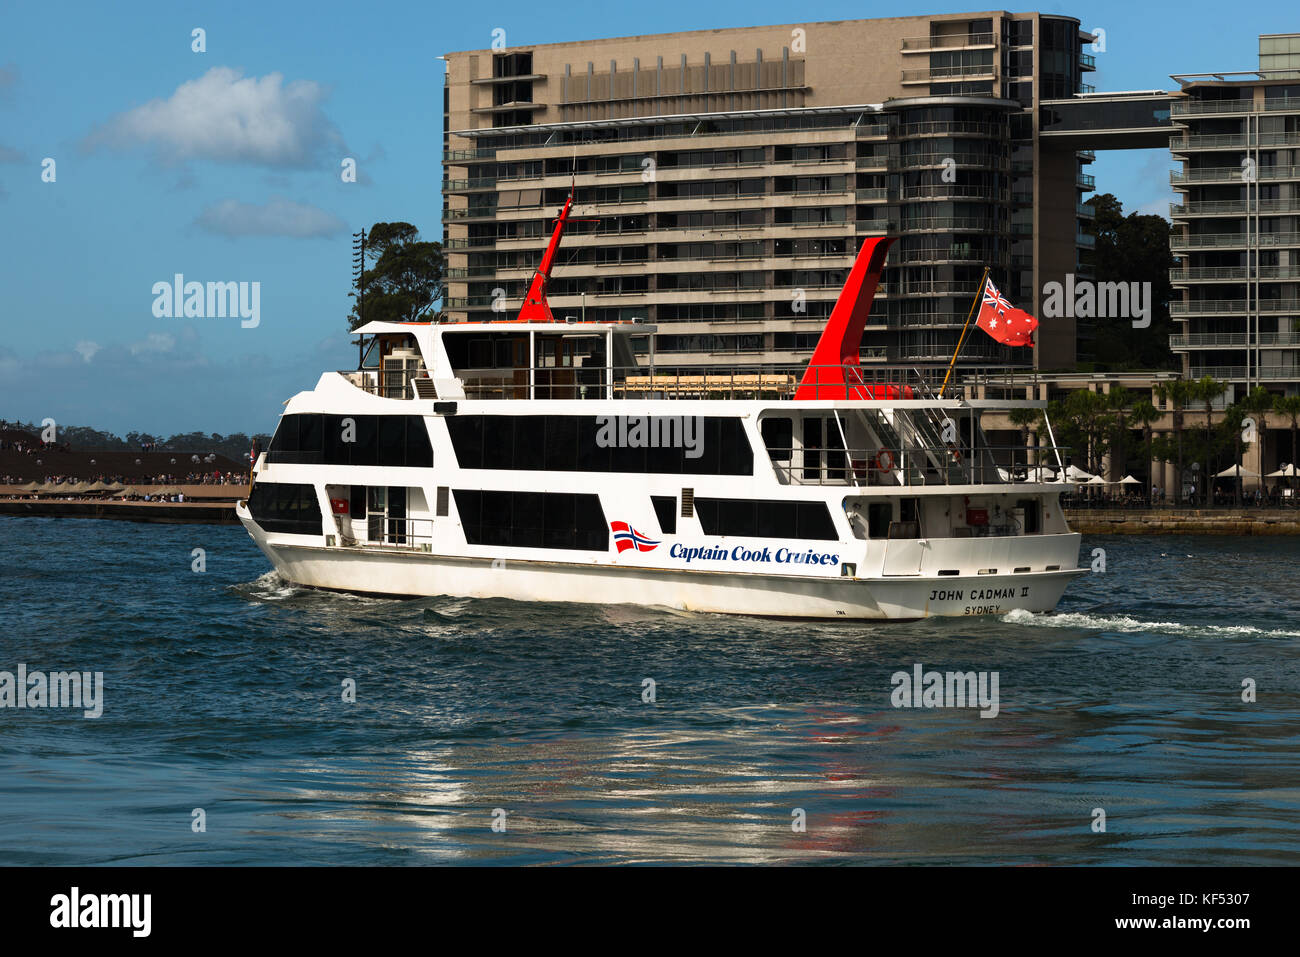 Captain Cook Cruises with Benelong Apartments to the rear. Sydney Harbour, New South Wales, Australia. Stock Photo